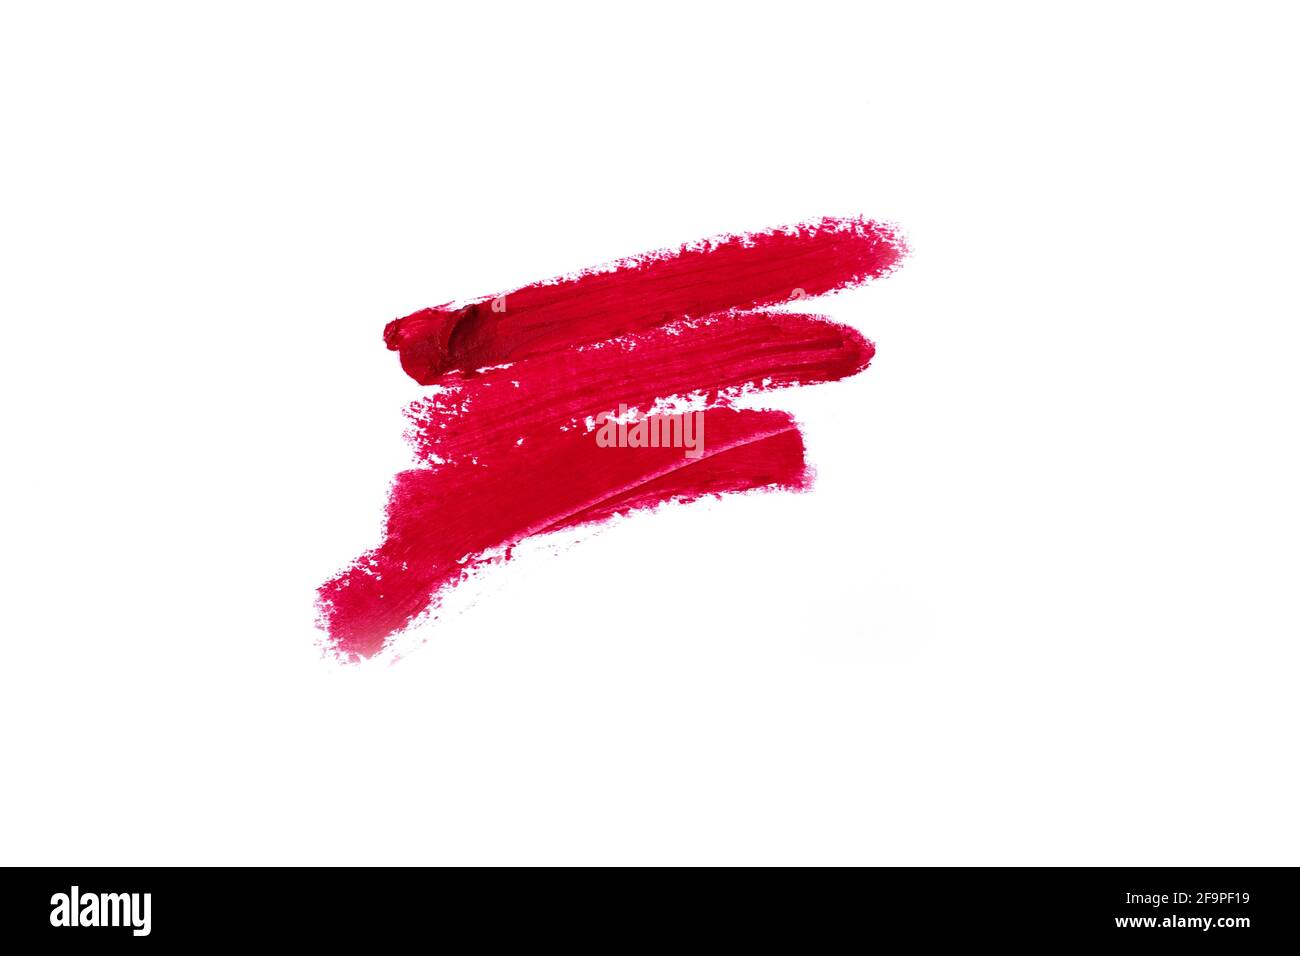 Lipstick smear smudge swatch isolated on white background. Cream makeup texture. Bright red color cosmetic product brush stroke swipe sample Stock Photo